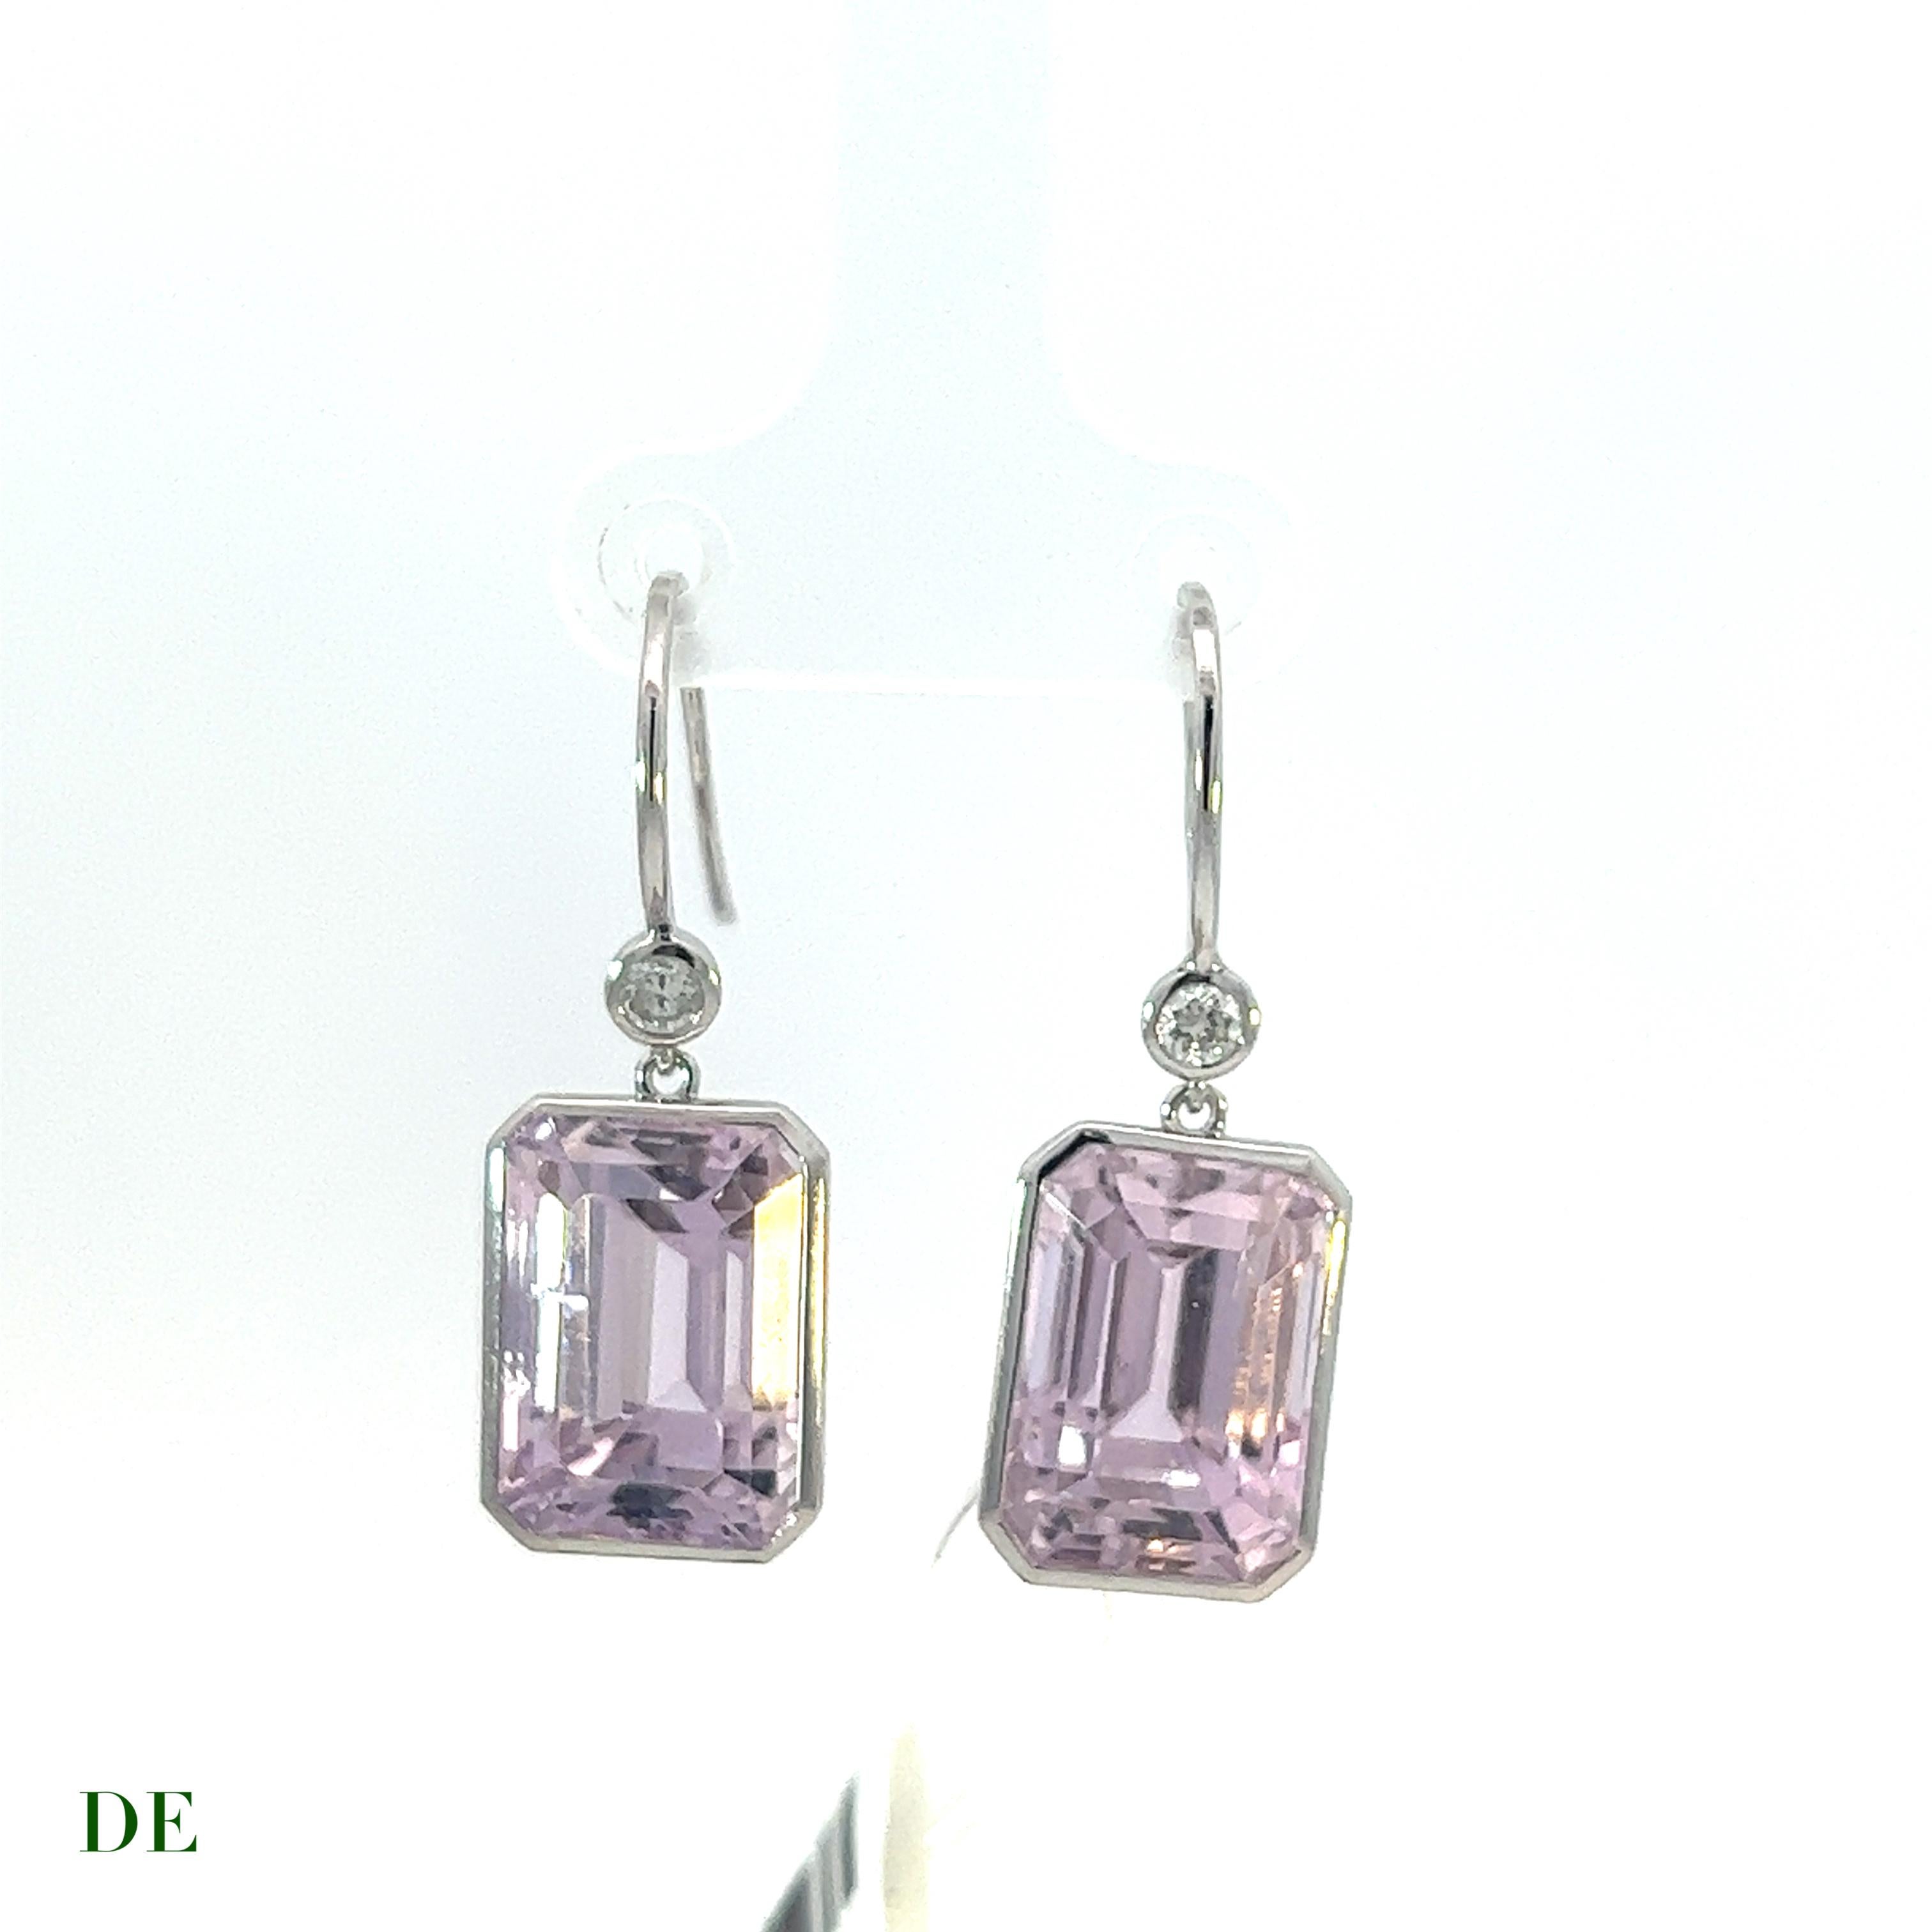 Vibrant Pink Barbie Kunzite Earring 22.18crt with .176crt white diamond earring

Introducing the exquisite and captivating Vibrant Pink Barbie Kunzite Earring, adorned with a staggering 22.18 carat gem of unparalleled beauty. Its mesmerizing pink